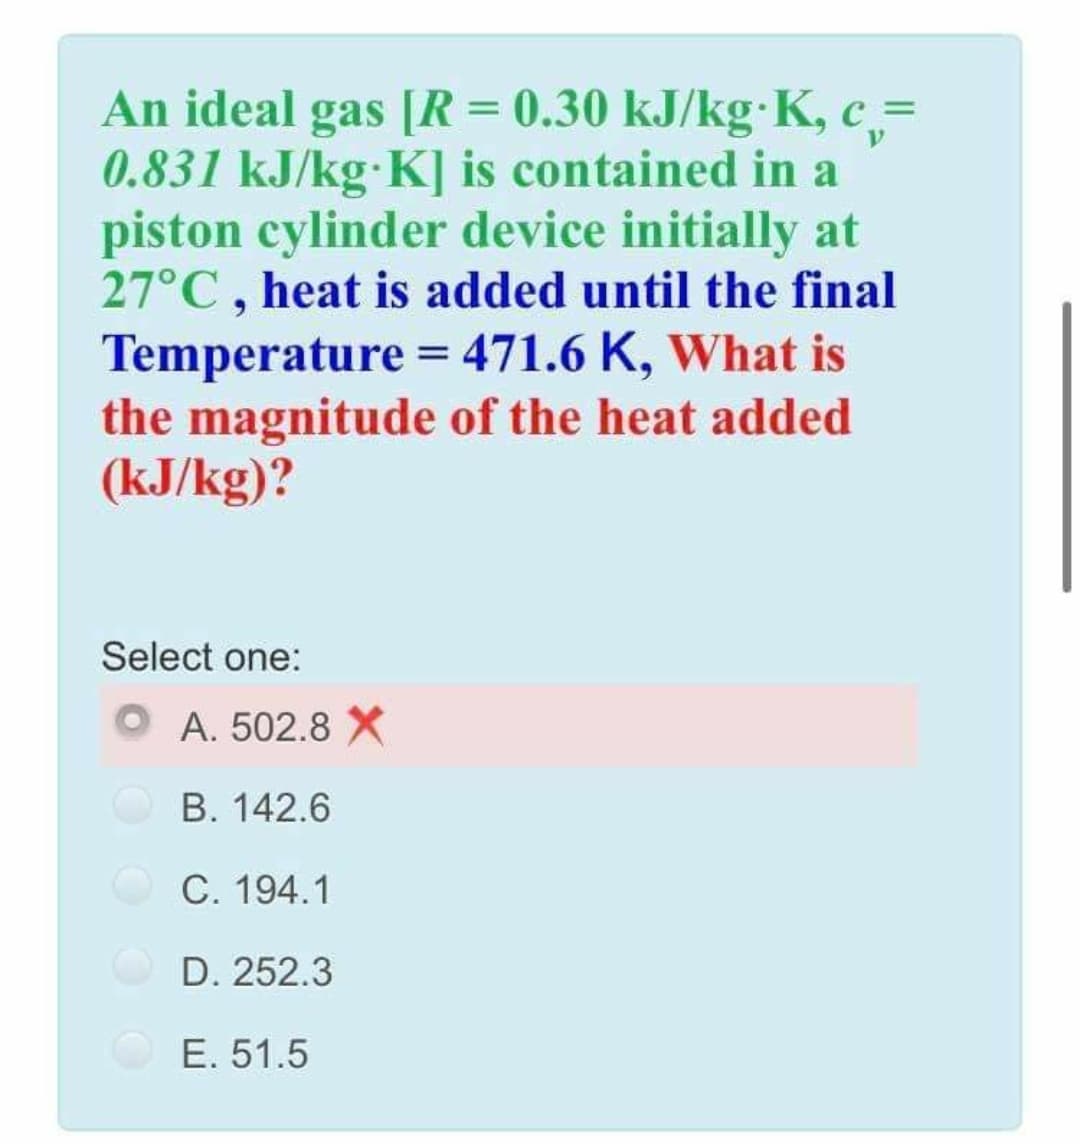 An ideal gas [R = 0.30 kJ/kg K, c,=
0.831 kJ/kg K] is contained in a
piston cylinder device initially at
27°C, heat is added until the final
Temperature = 471.6 K, What is
the magnitude of the heat added
(kJ/kg)?
%3D
Select one:
A. 502.8 X
B. 142.6
C. 194.1
D. 252.3
E. 51.5
